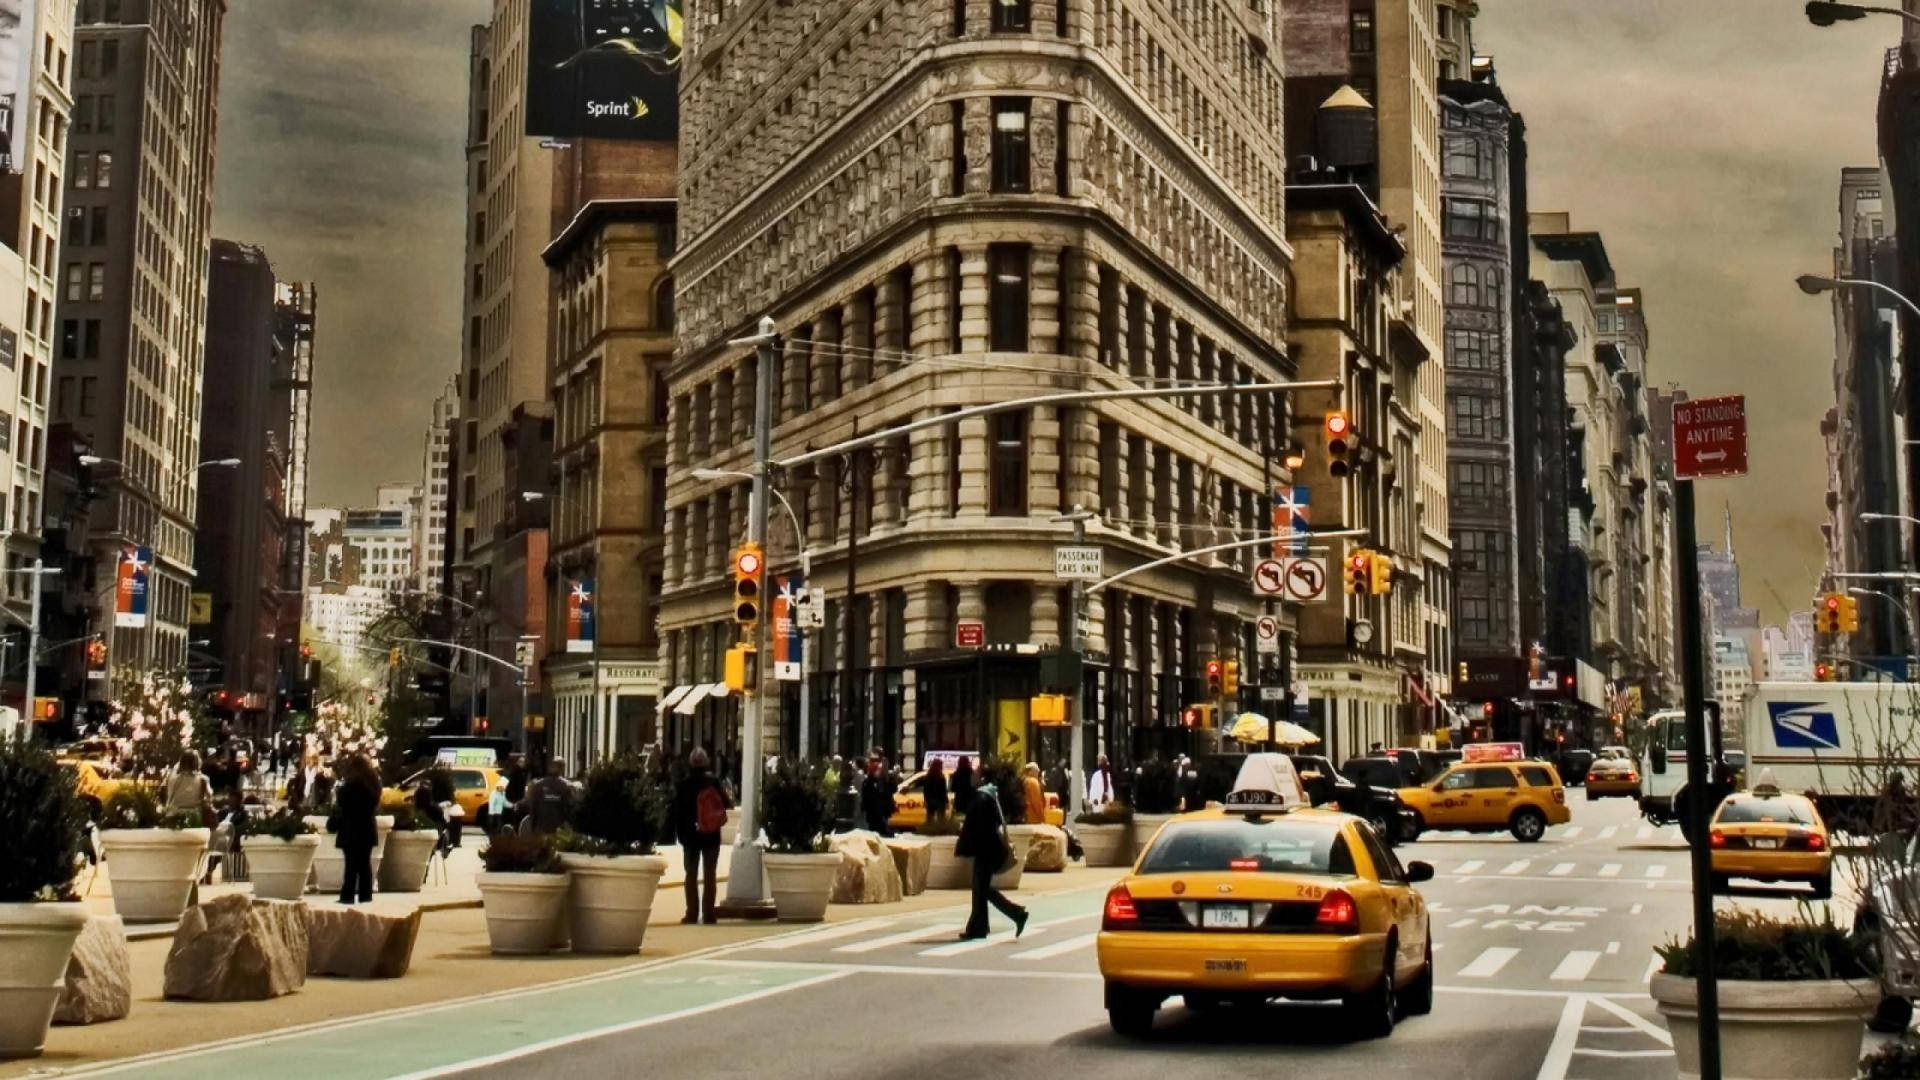 A City Street With Tall Buildings And Taxis Wallpaper